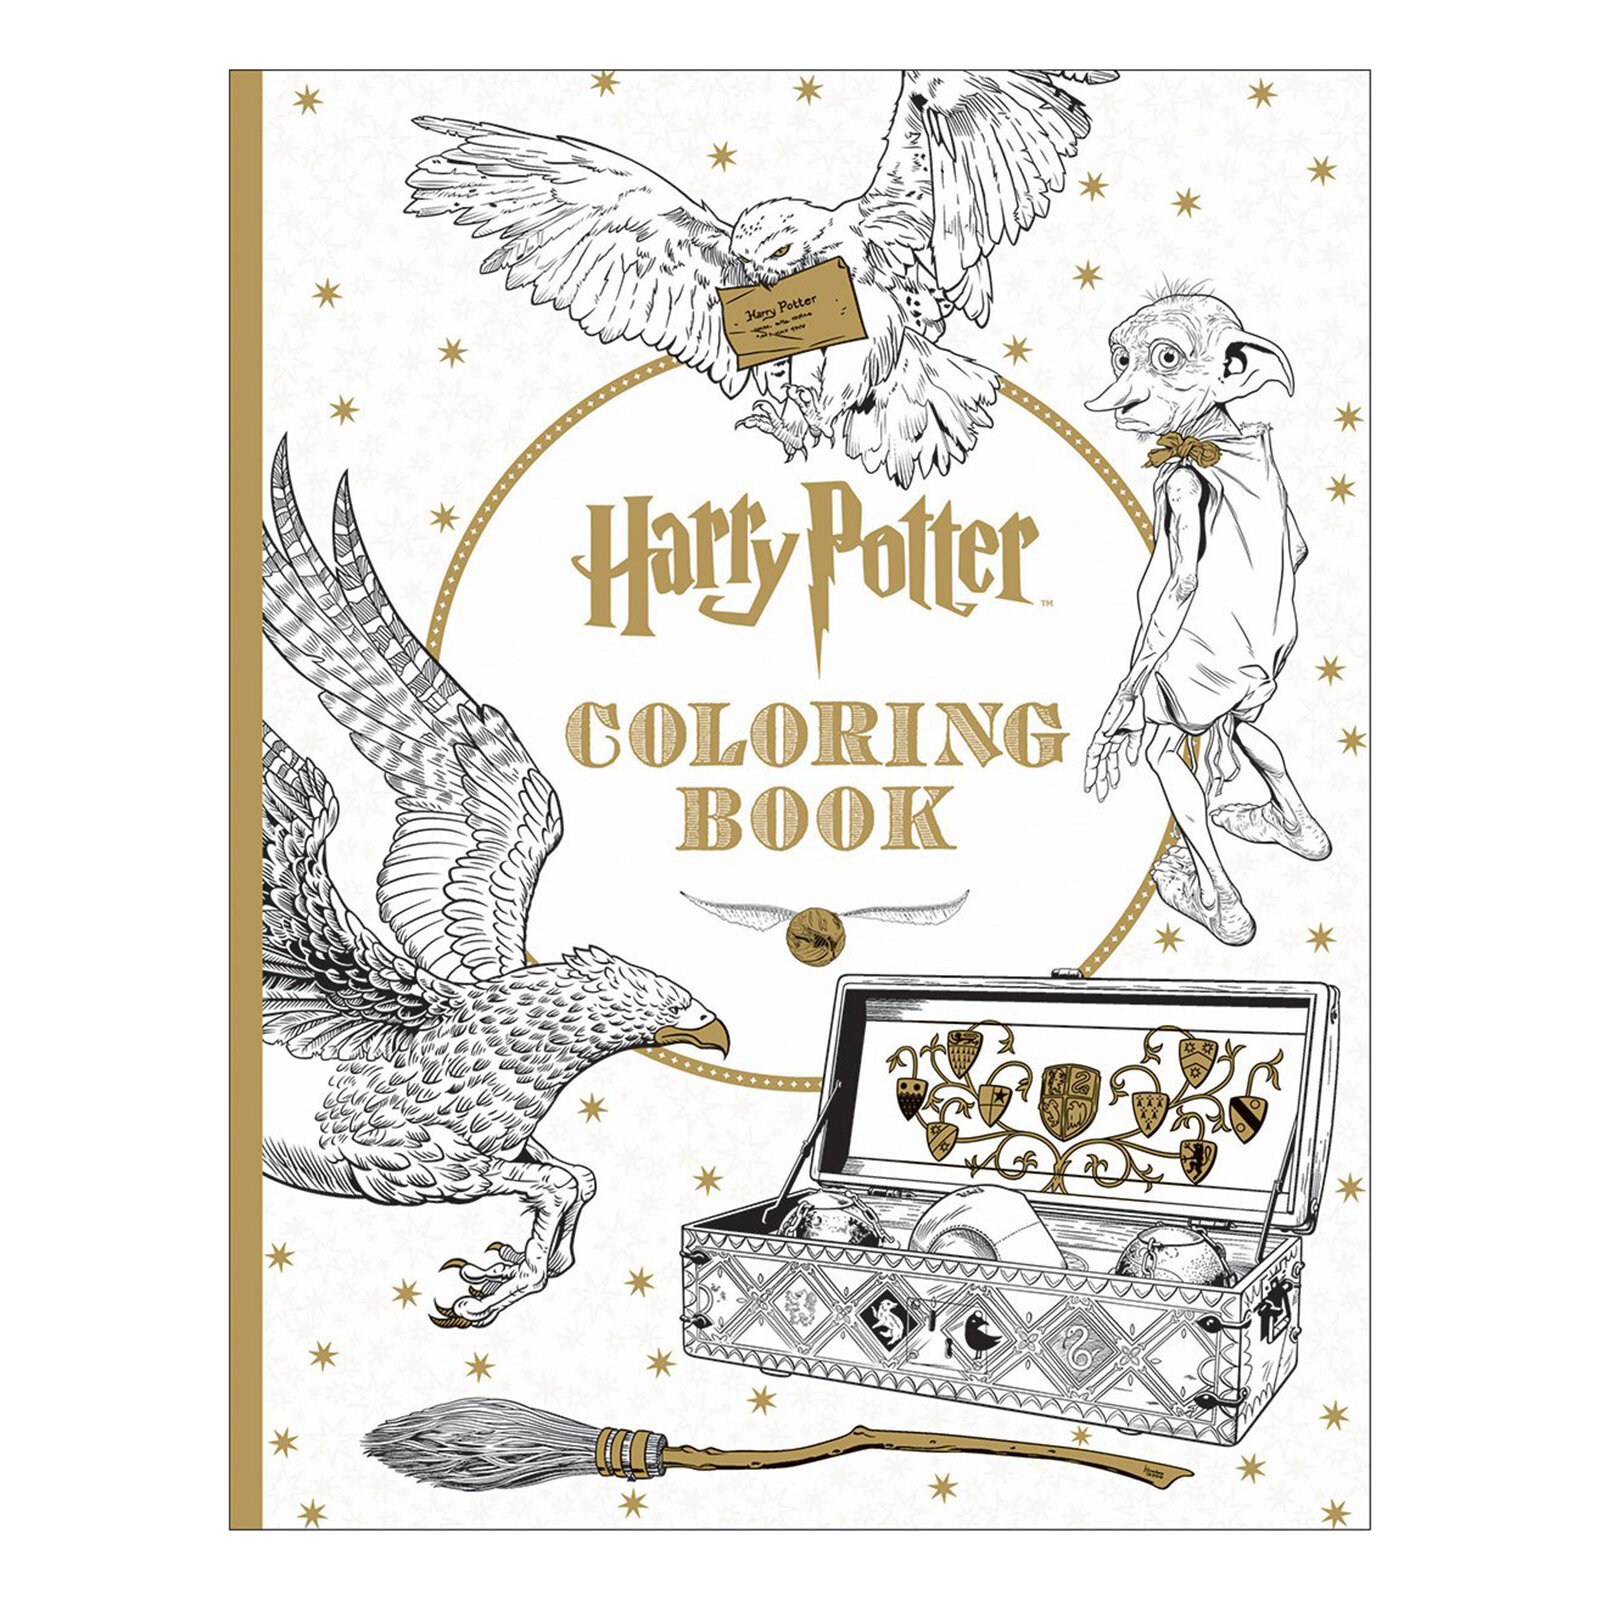 Harry Potter Coloring Book, Scholastic,  $10.97